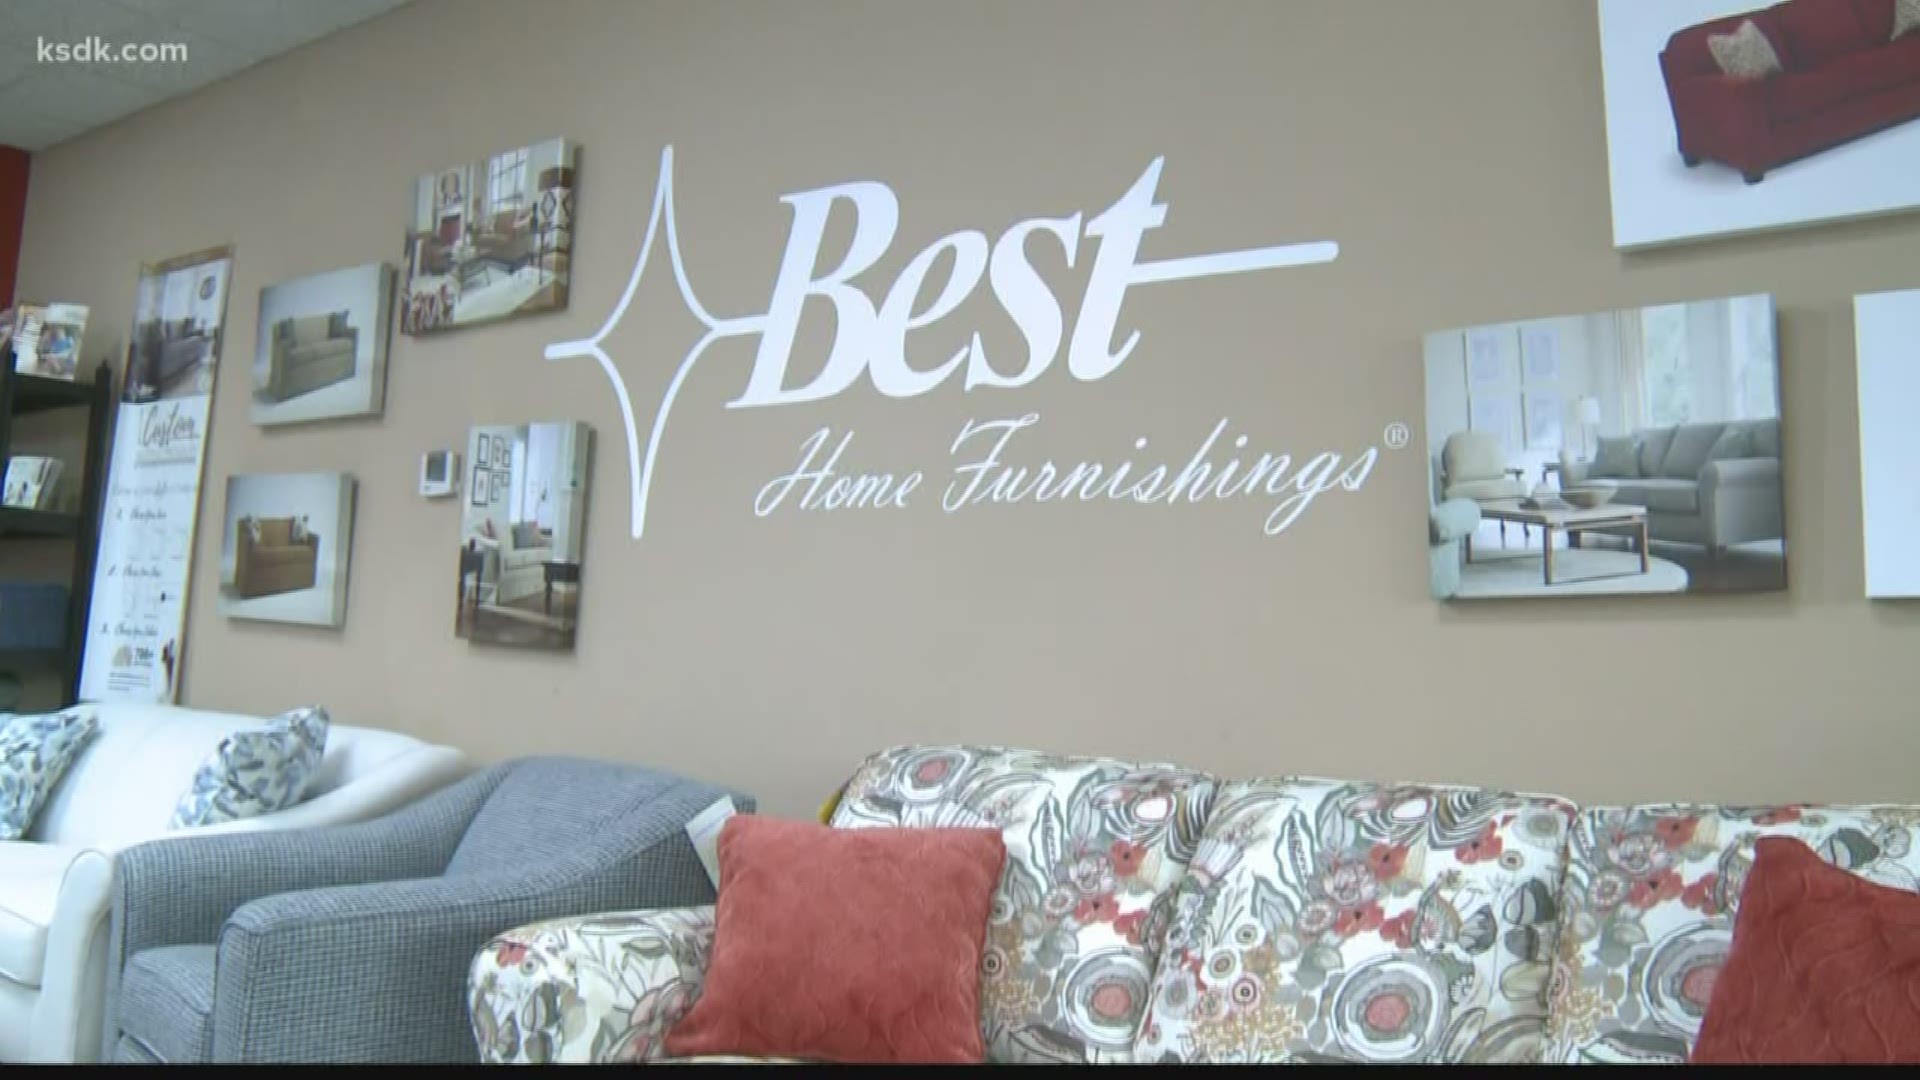 Don’t miss out on the awesome selection and sales at Best Home Furnishings.